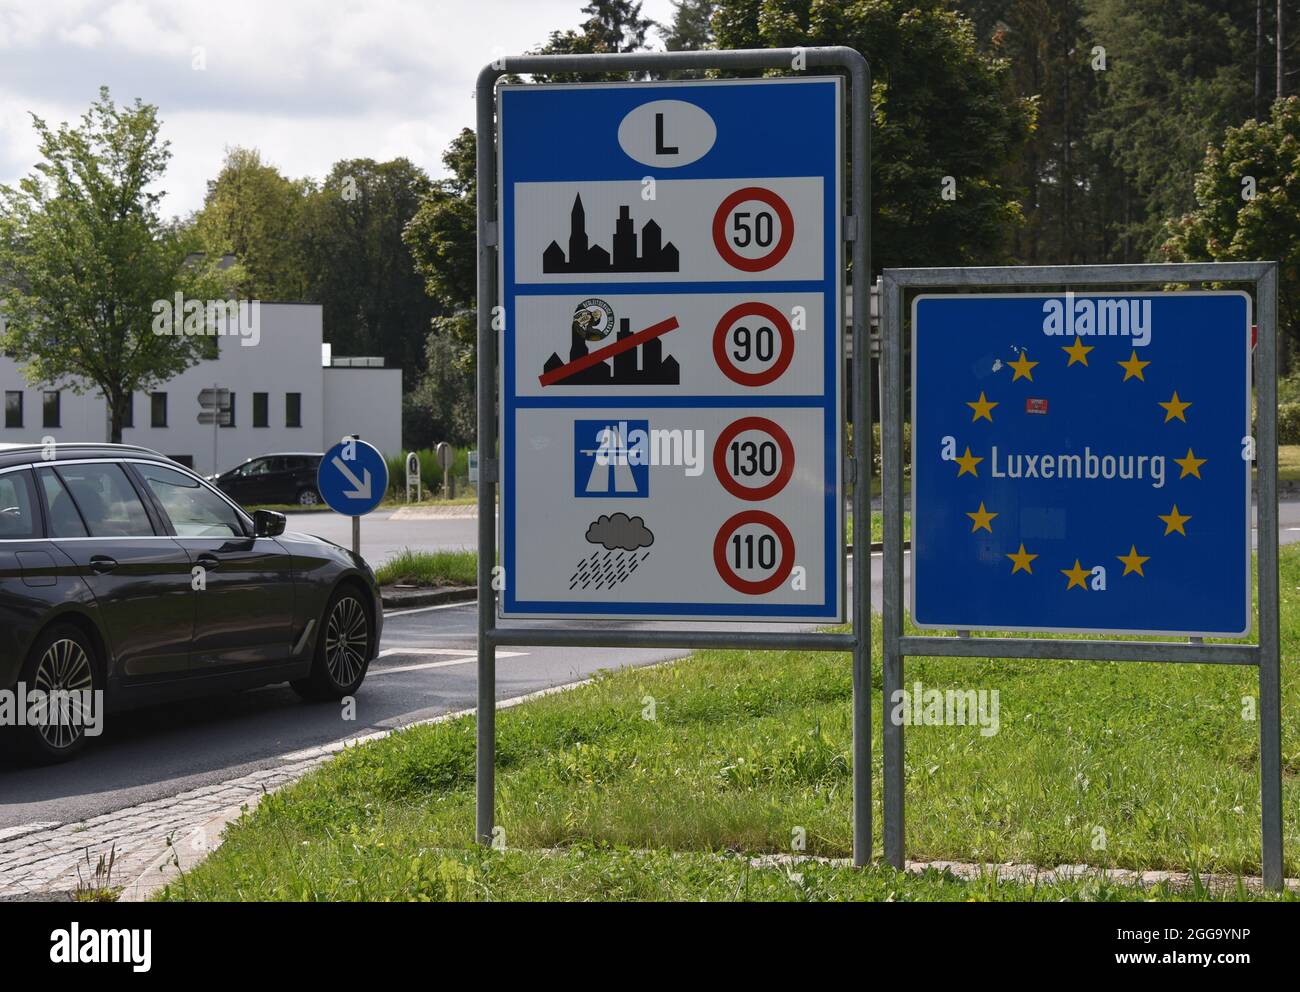 Wemperhardt, Luxembourg. 08th Aug, 2021. Border sign Luxembourg, bordered by Europe stars on a blue background, at the German-Luxembourg border and sign at the border to Luxembourg shows speed limits on roads for Luxembourg. Credit: Horst Galuschka/dpa/Alamy Live News Stock Photo